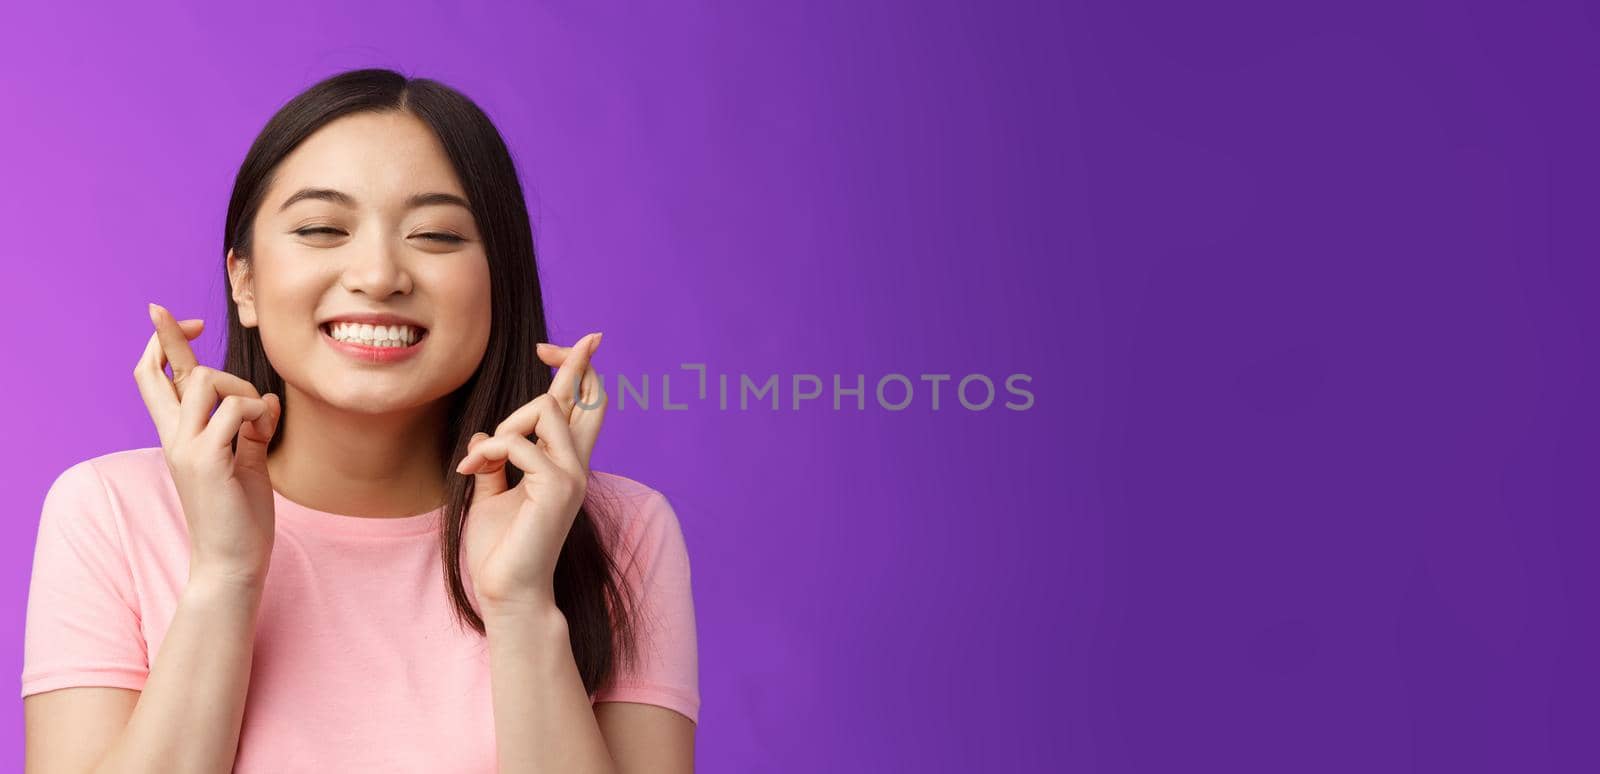 Headshot dreamy lucky cute asian girl believe she win, make wish, cross fingers good fortune, close eyes smiling happily feeling hopeful receive positive results, stand purple background.